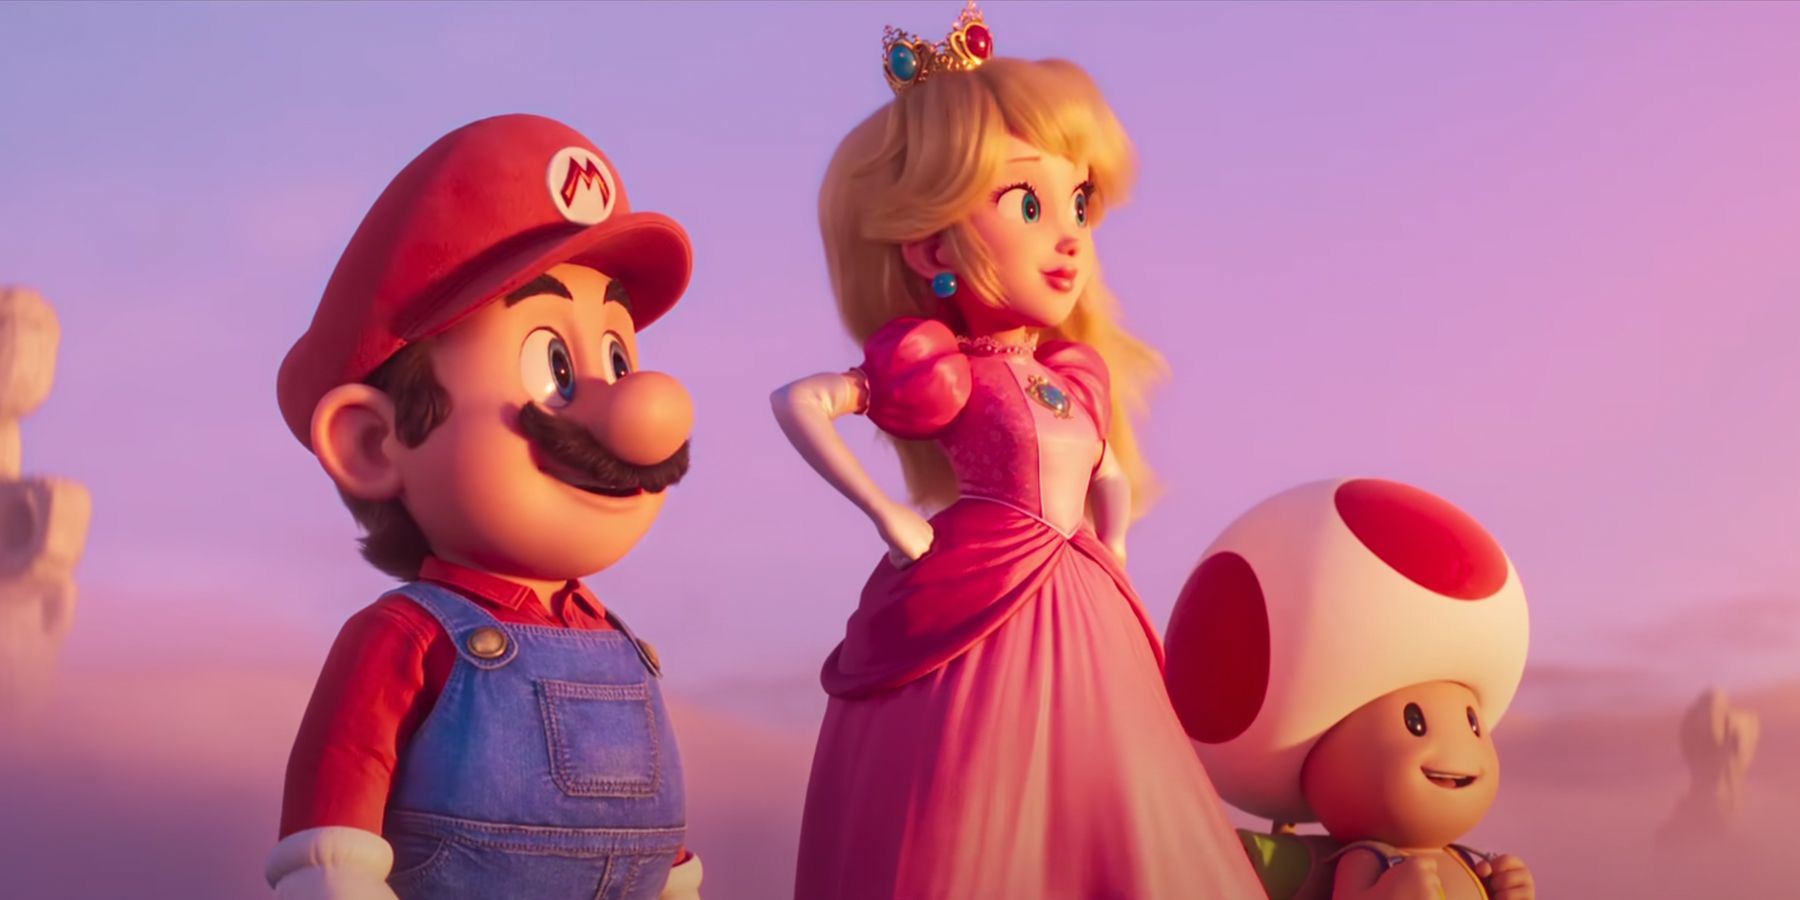 Memes Flood In As Super Mario Bros. Movie Shows a Catchy Tease